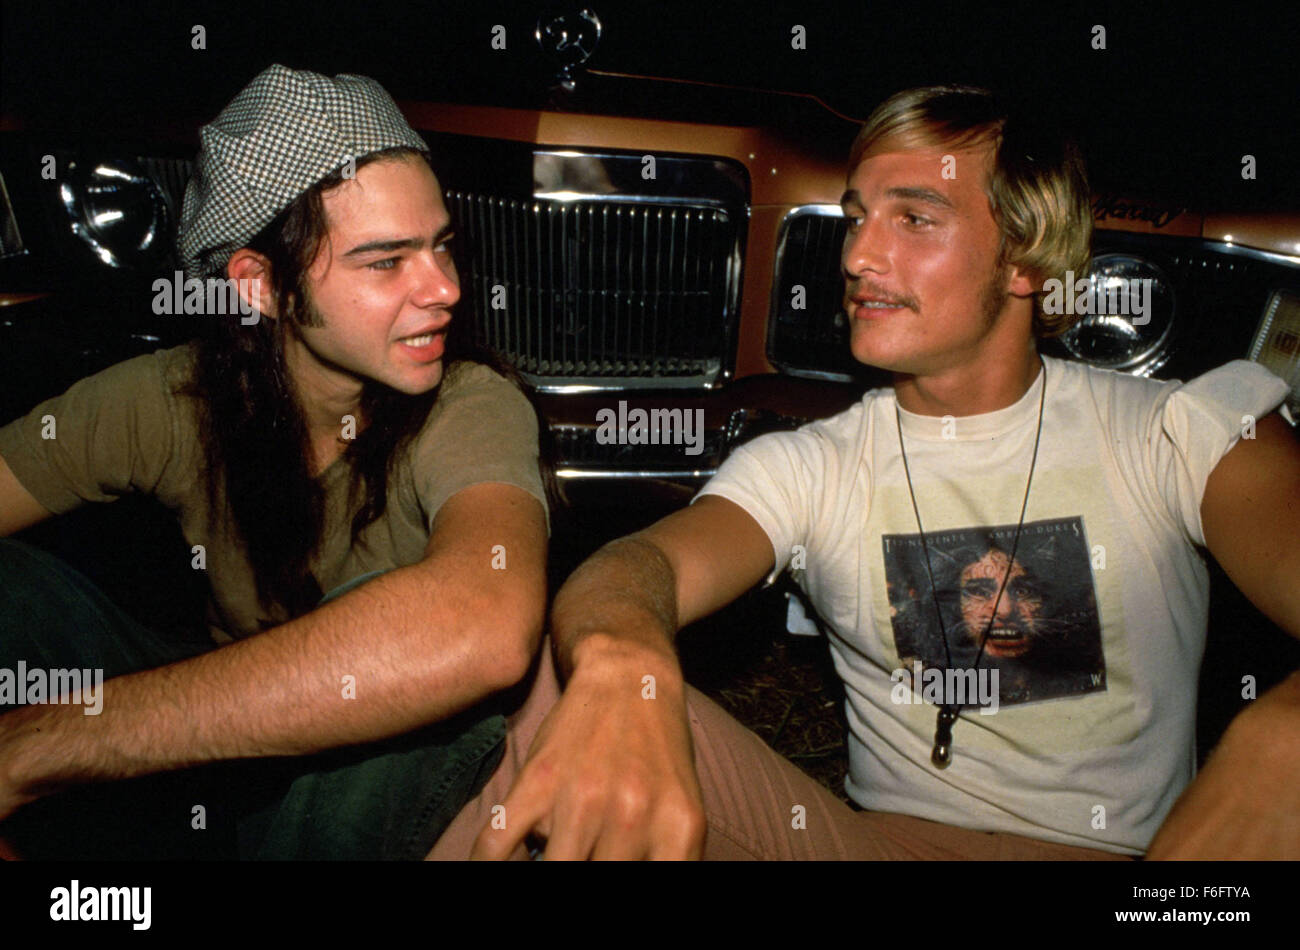 Sep 10, 1993; Austin, TX, USA; RORY COCHRANE and MATTHEW MCCONAUGHEY star as Ron Slater and David Wooderson in the comedy drama 'Dazed and Confused' directed by Richard Linklater. Stock Photo